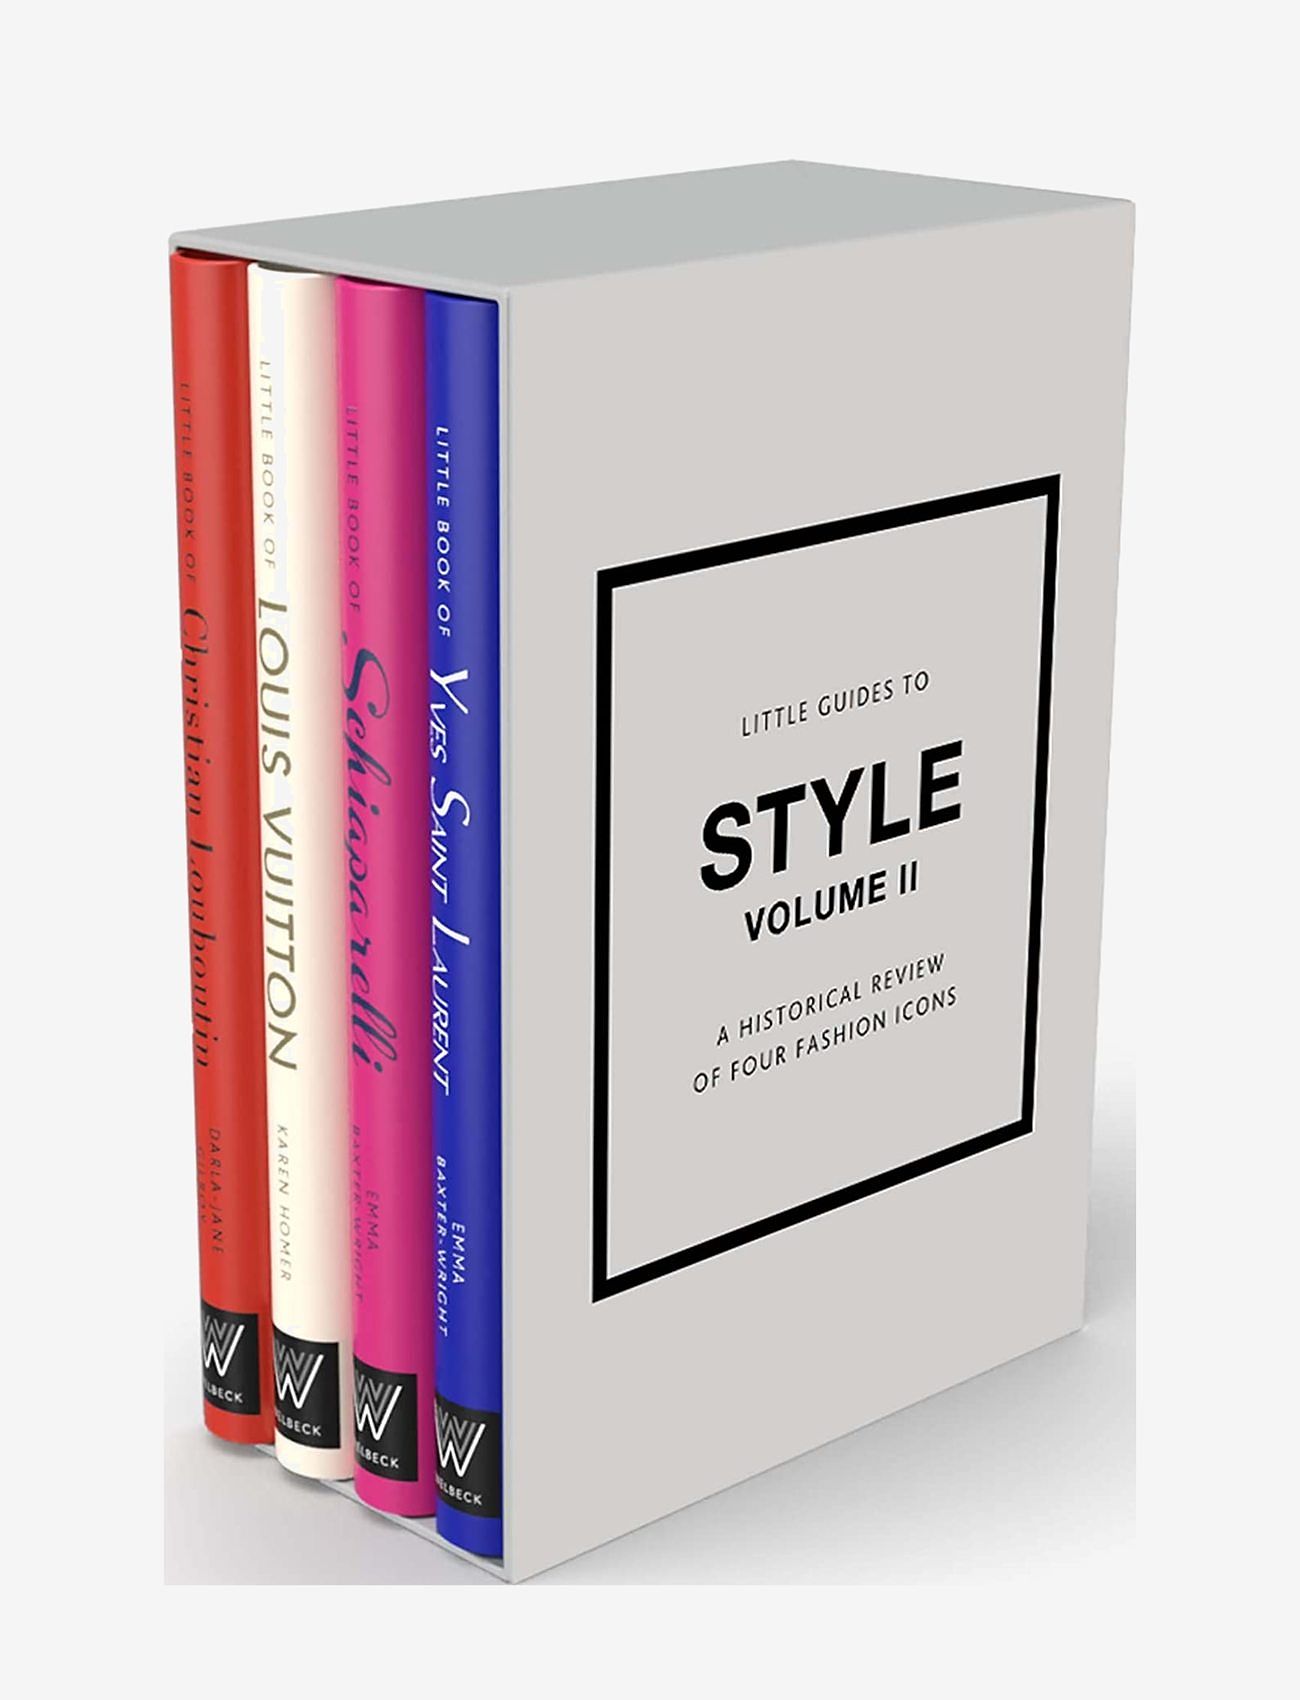 New Mags - Little Guides to Style Vol. II - verjaardagscadeaus - grey - 0